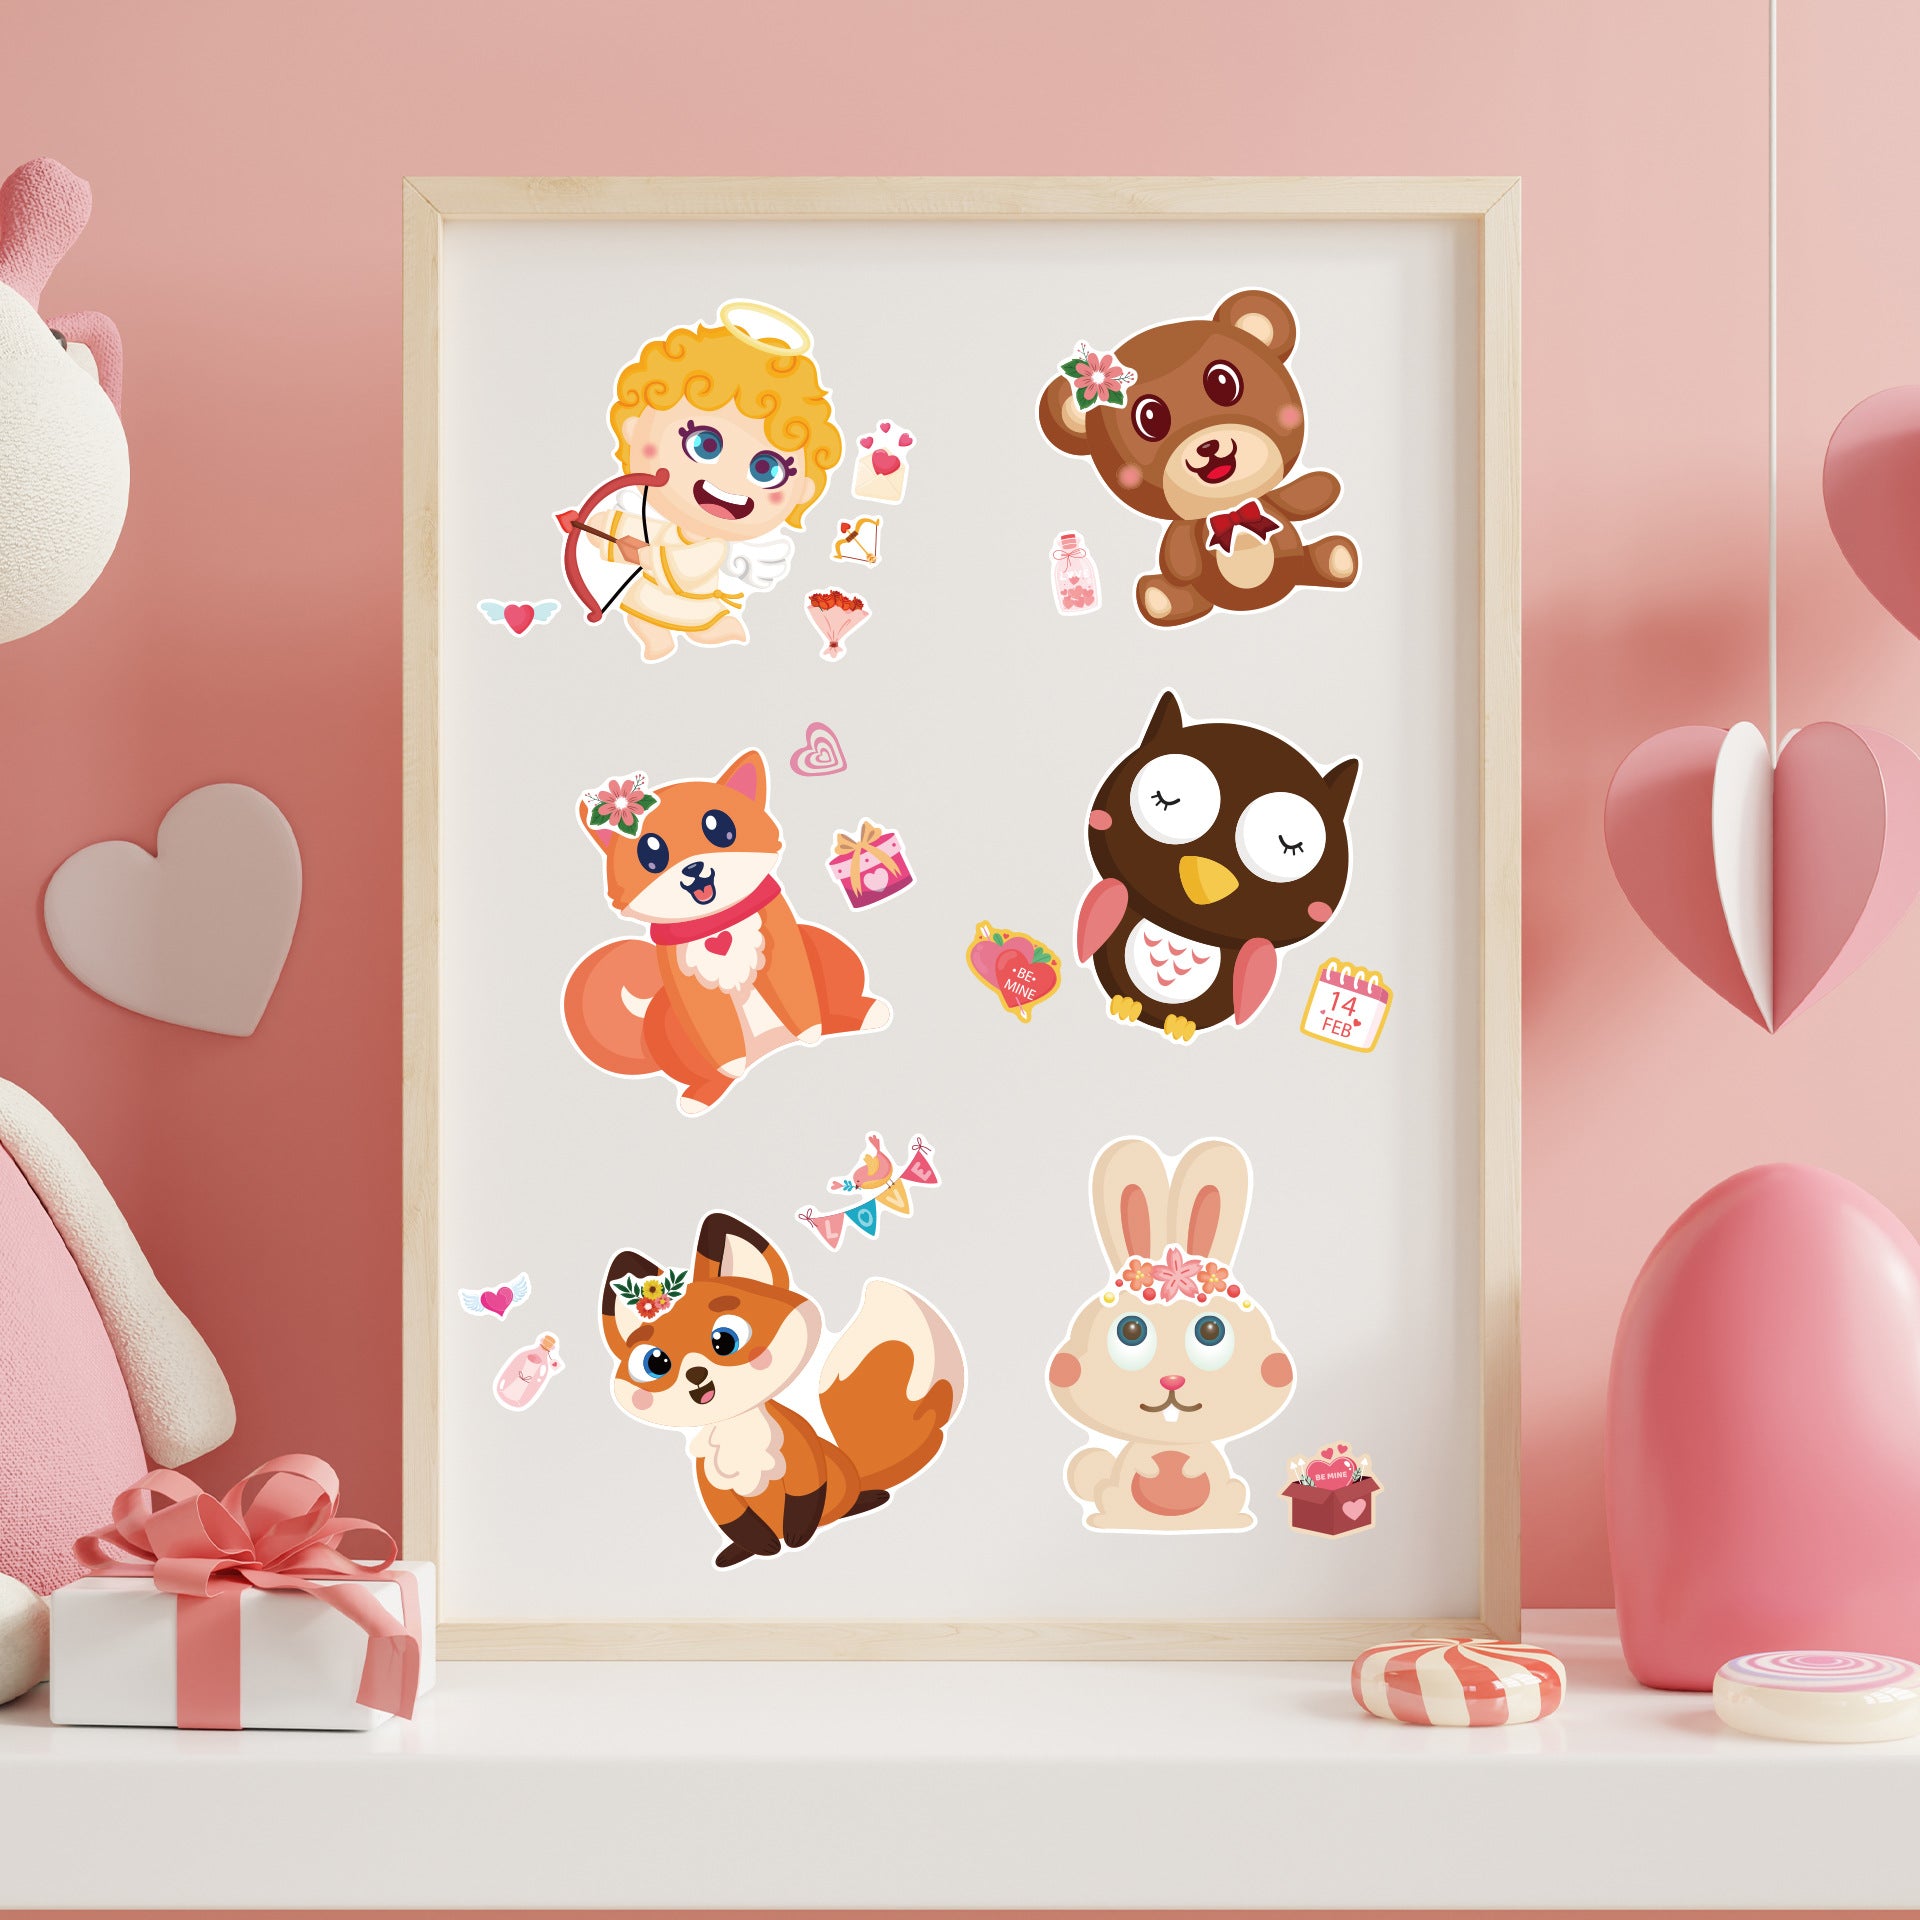 24 Sheets Valentine's Day Animal Stickers for Kids - TTpen